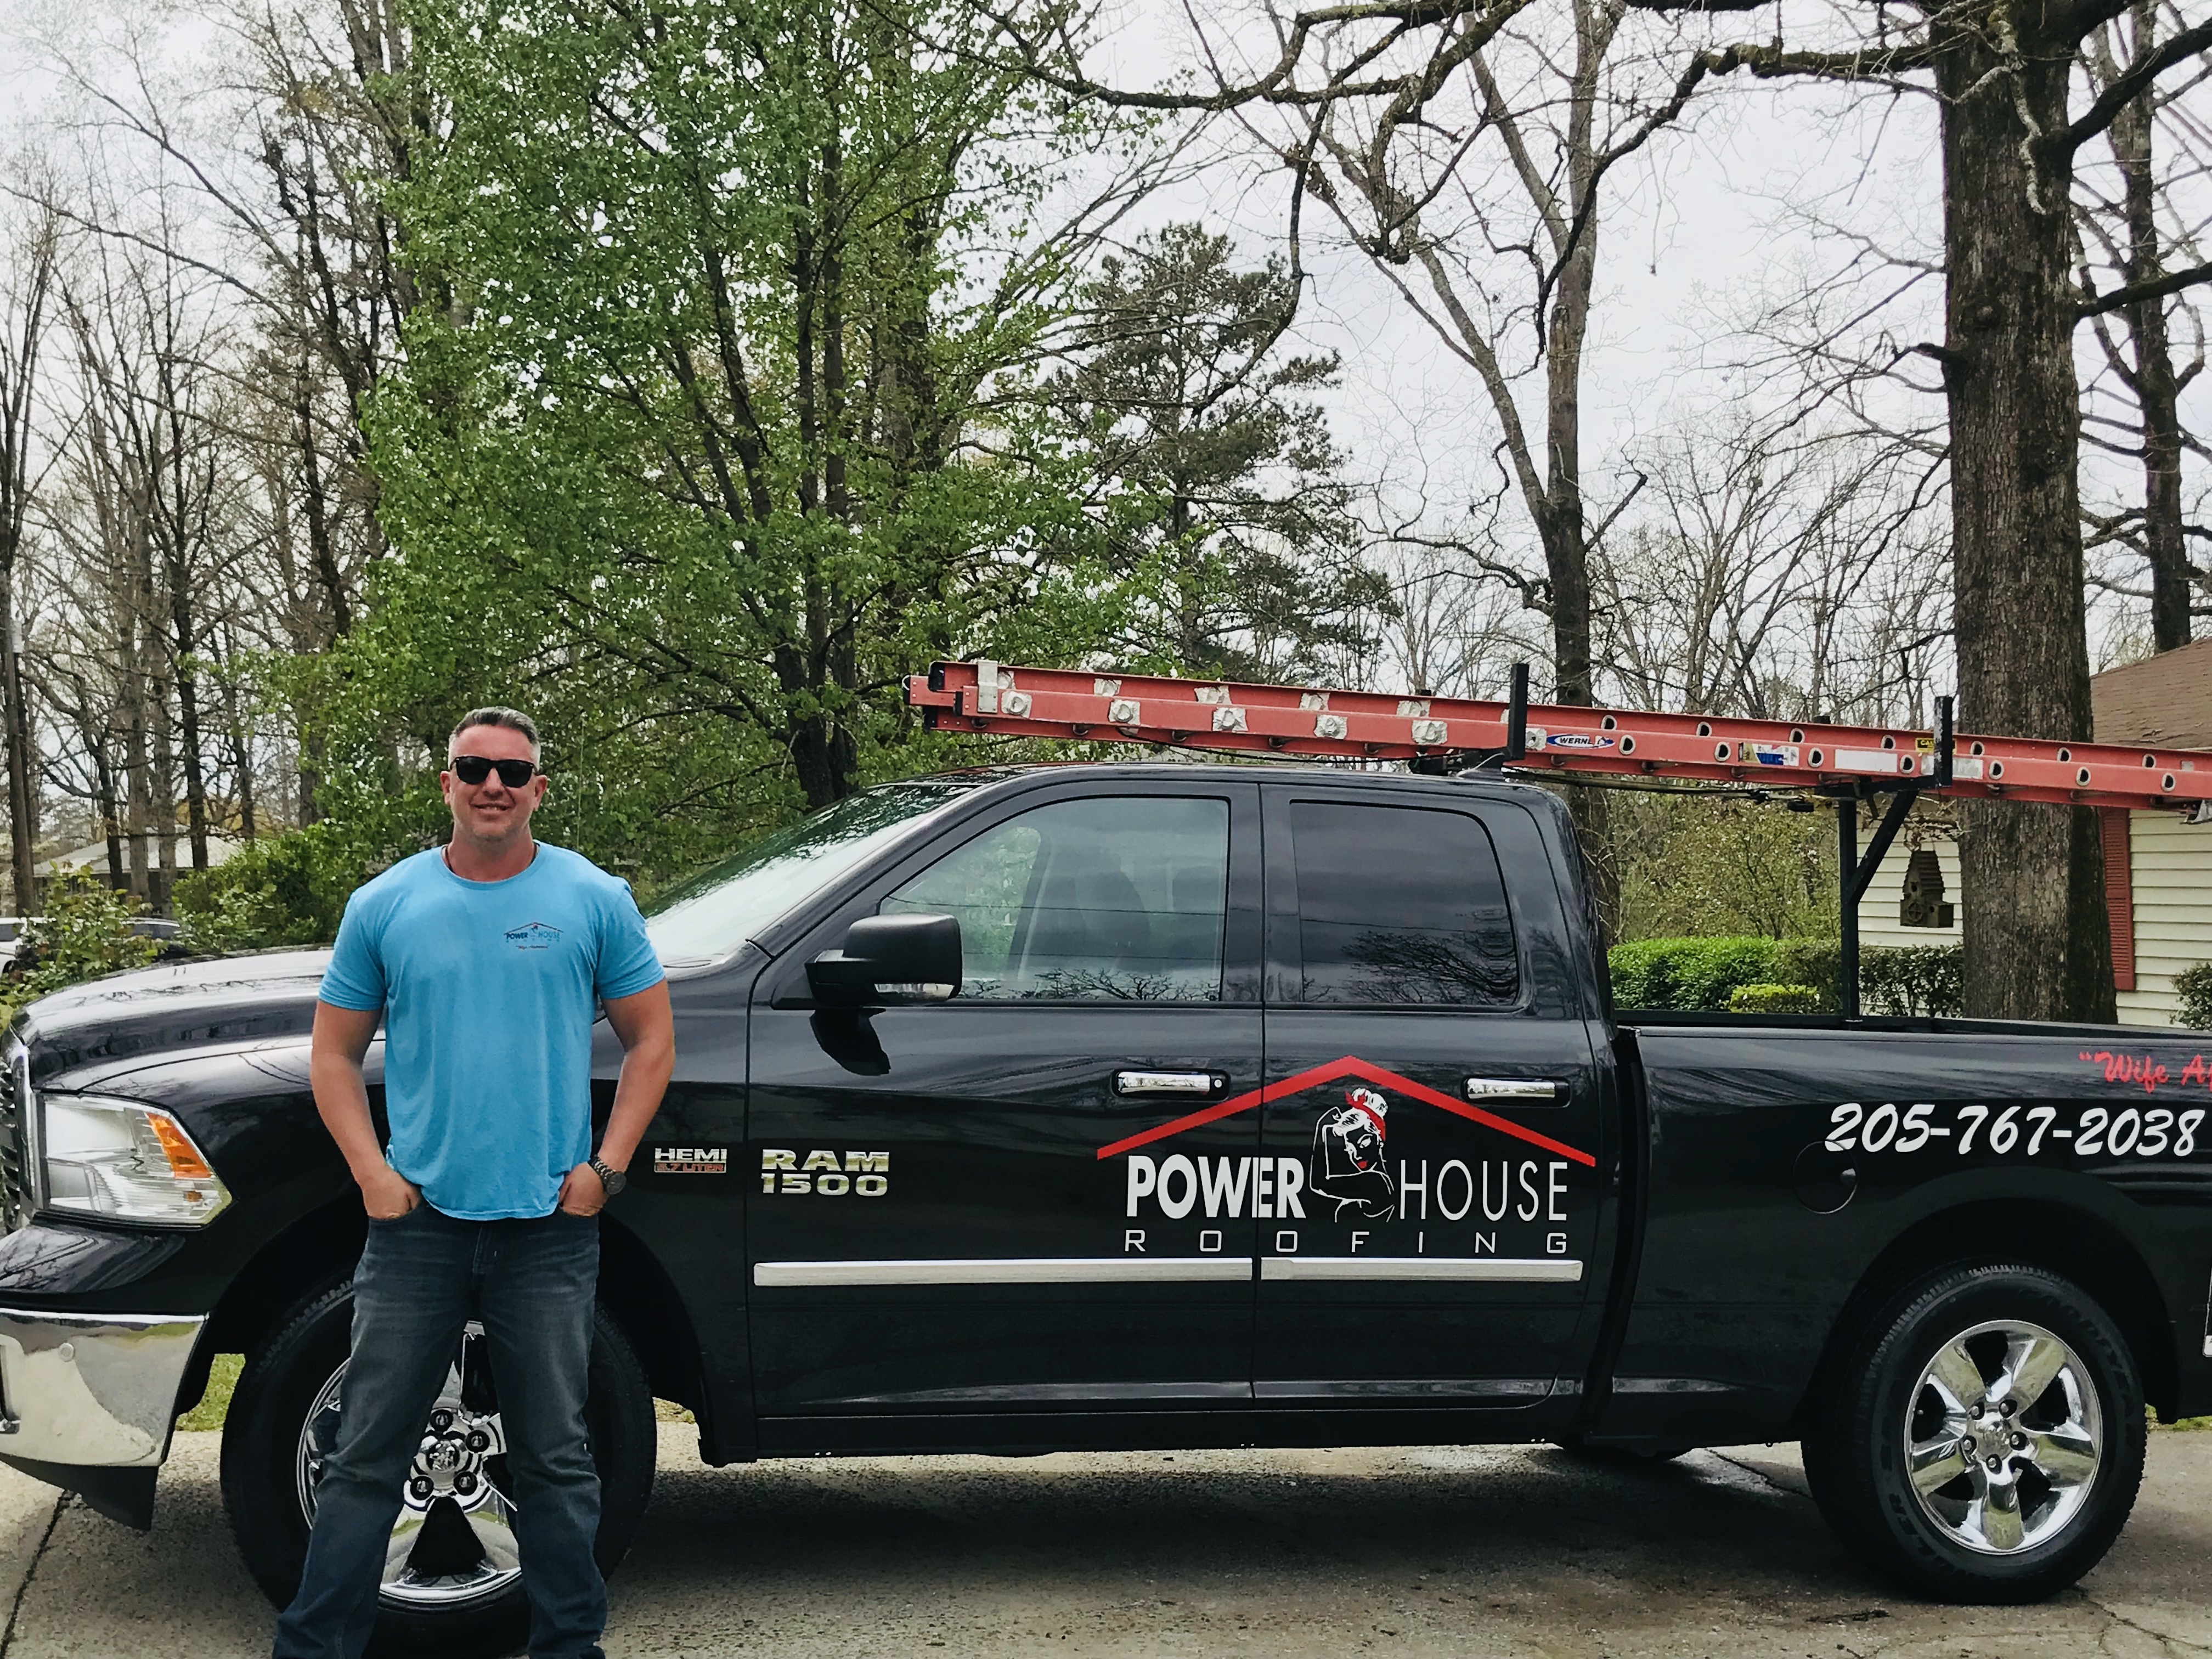 Power House Roofing and Restoration: “Wife Approved”